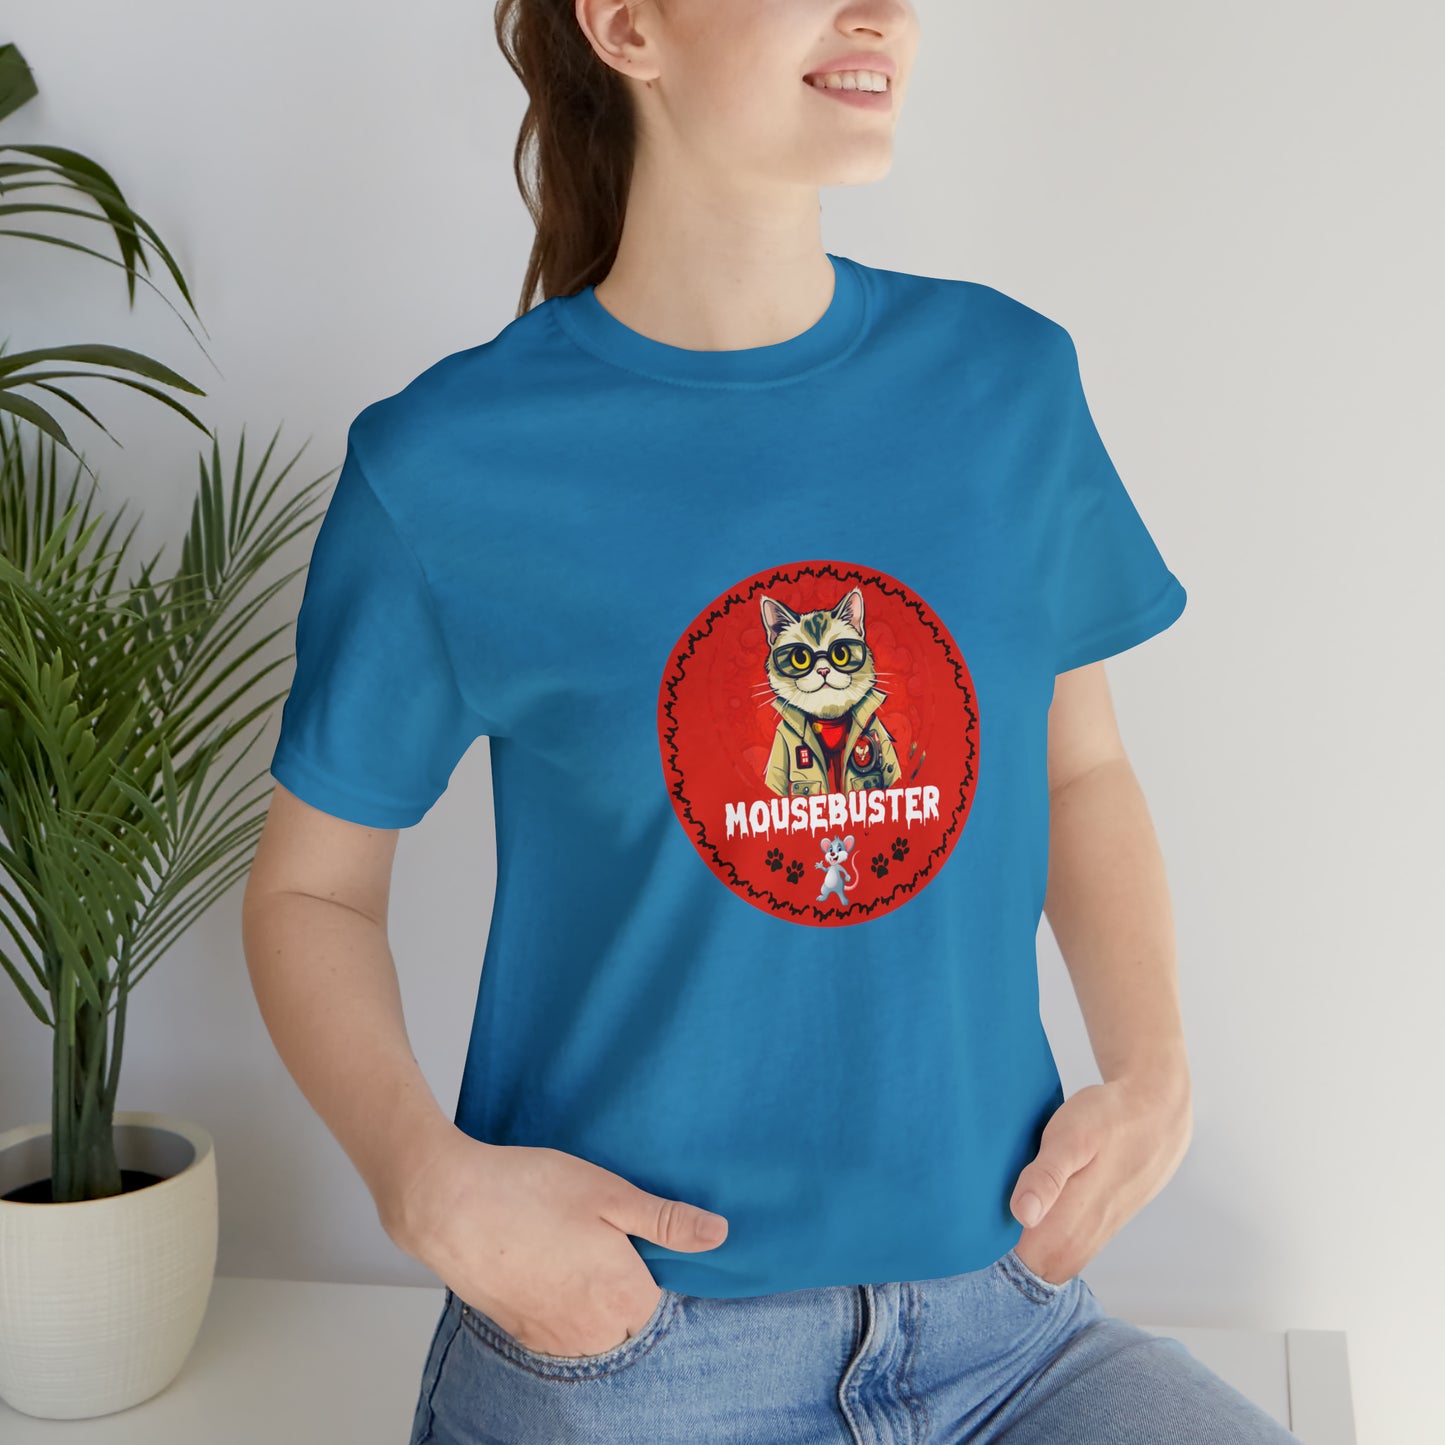 Animals, Cats, Mouse, Funny, Holiday, Halloween - Adult, Regular Fit, Soft Cotton, T-shirt